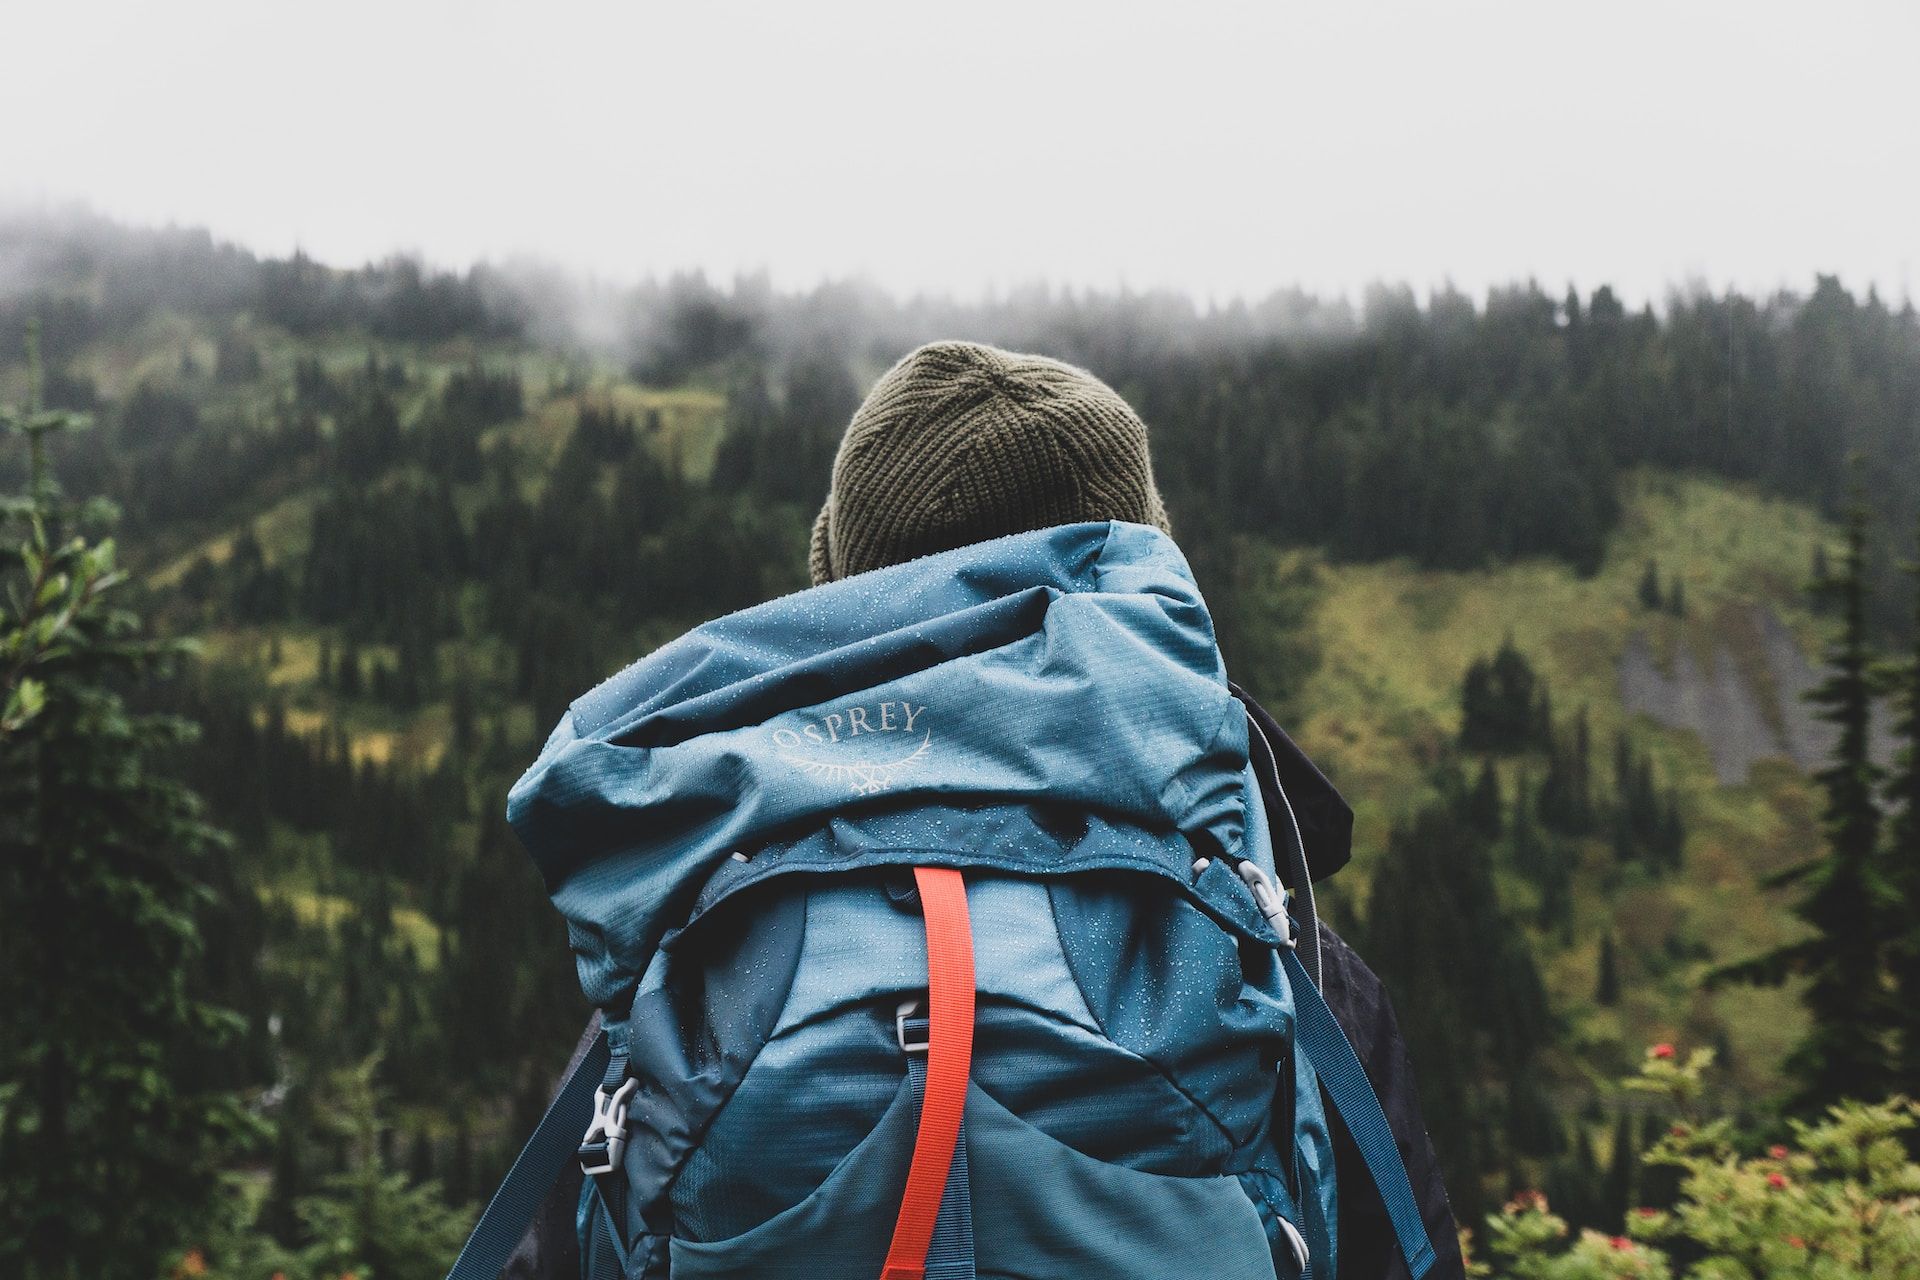 Traveler with a blue backpack looks outwards towards a misty forest